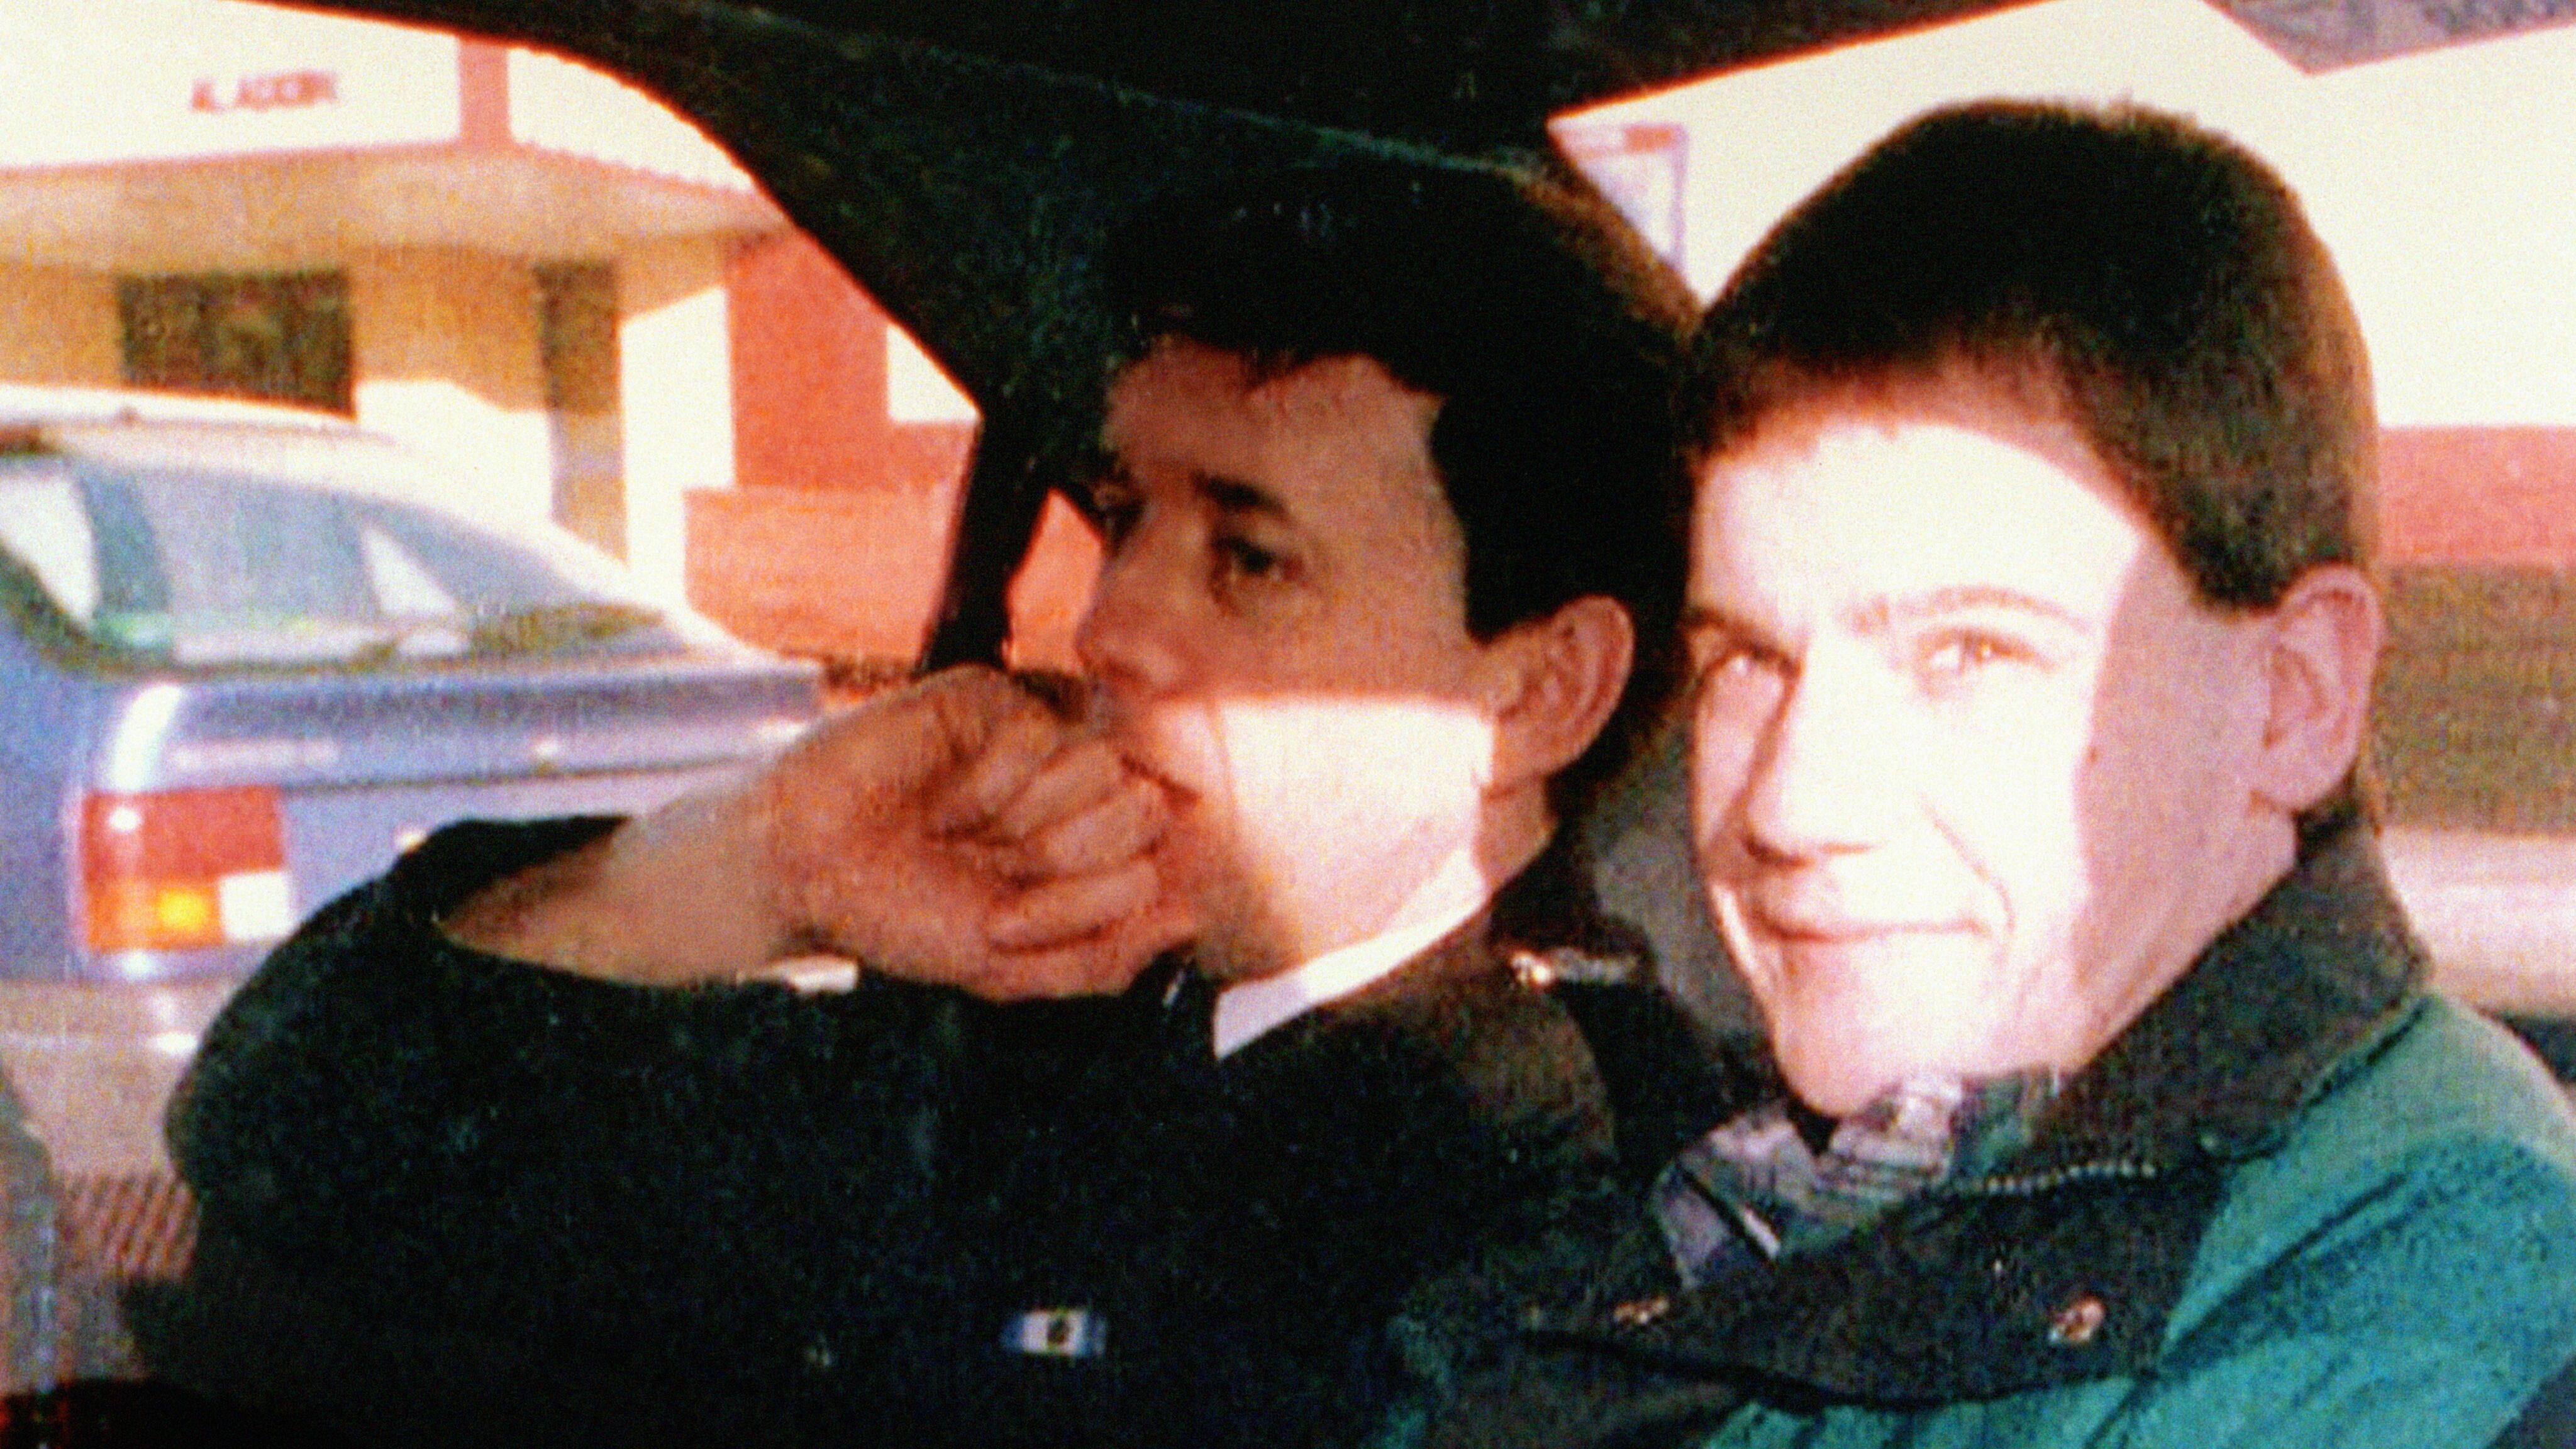 Paul Weddle (right) arriving at Teesside Crown Court, where he was jailed for life in 1994